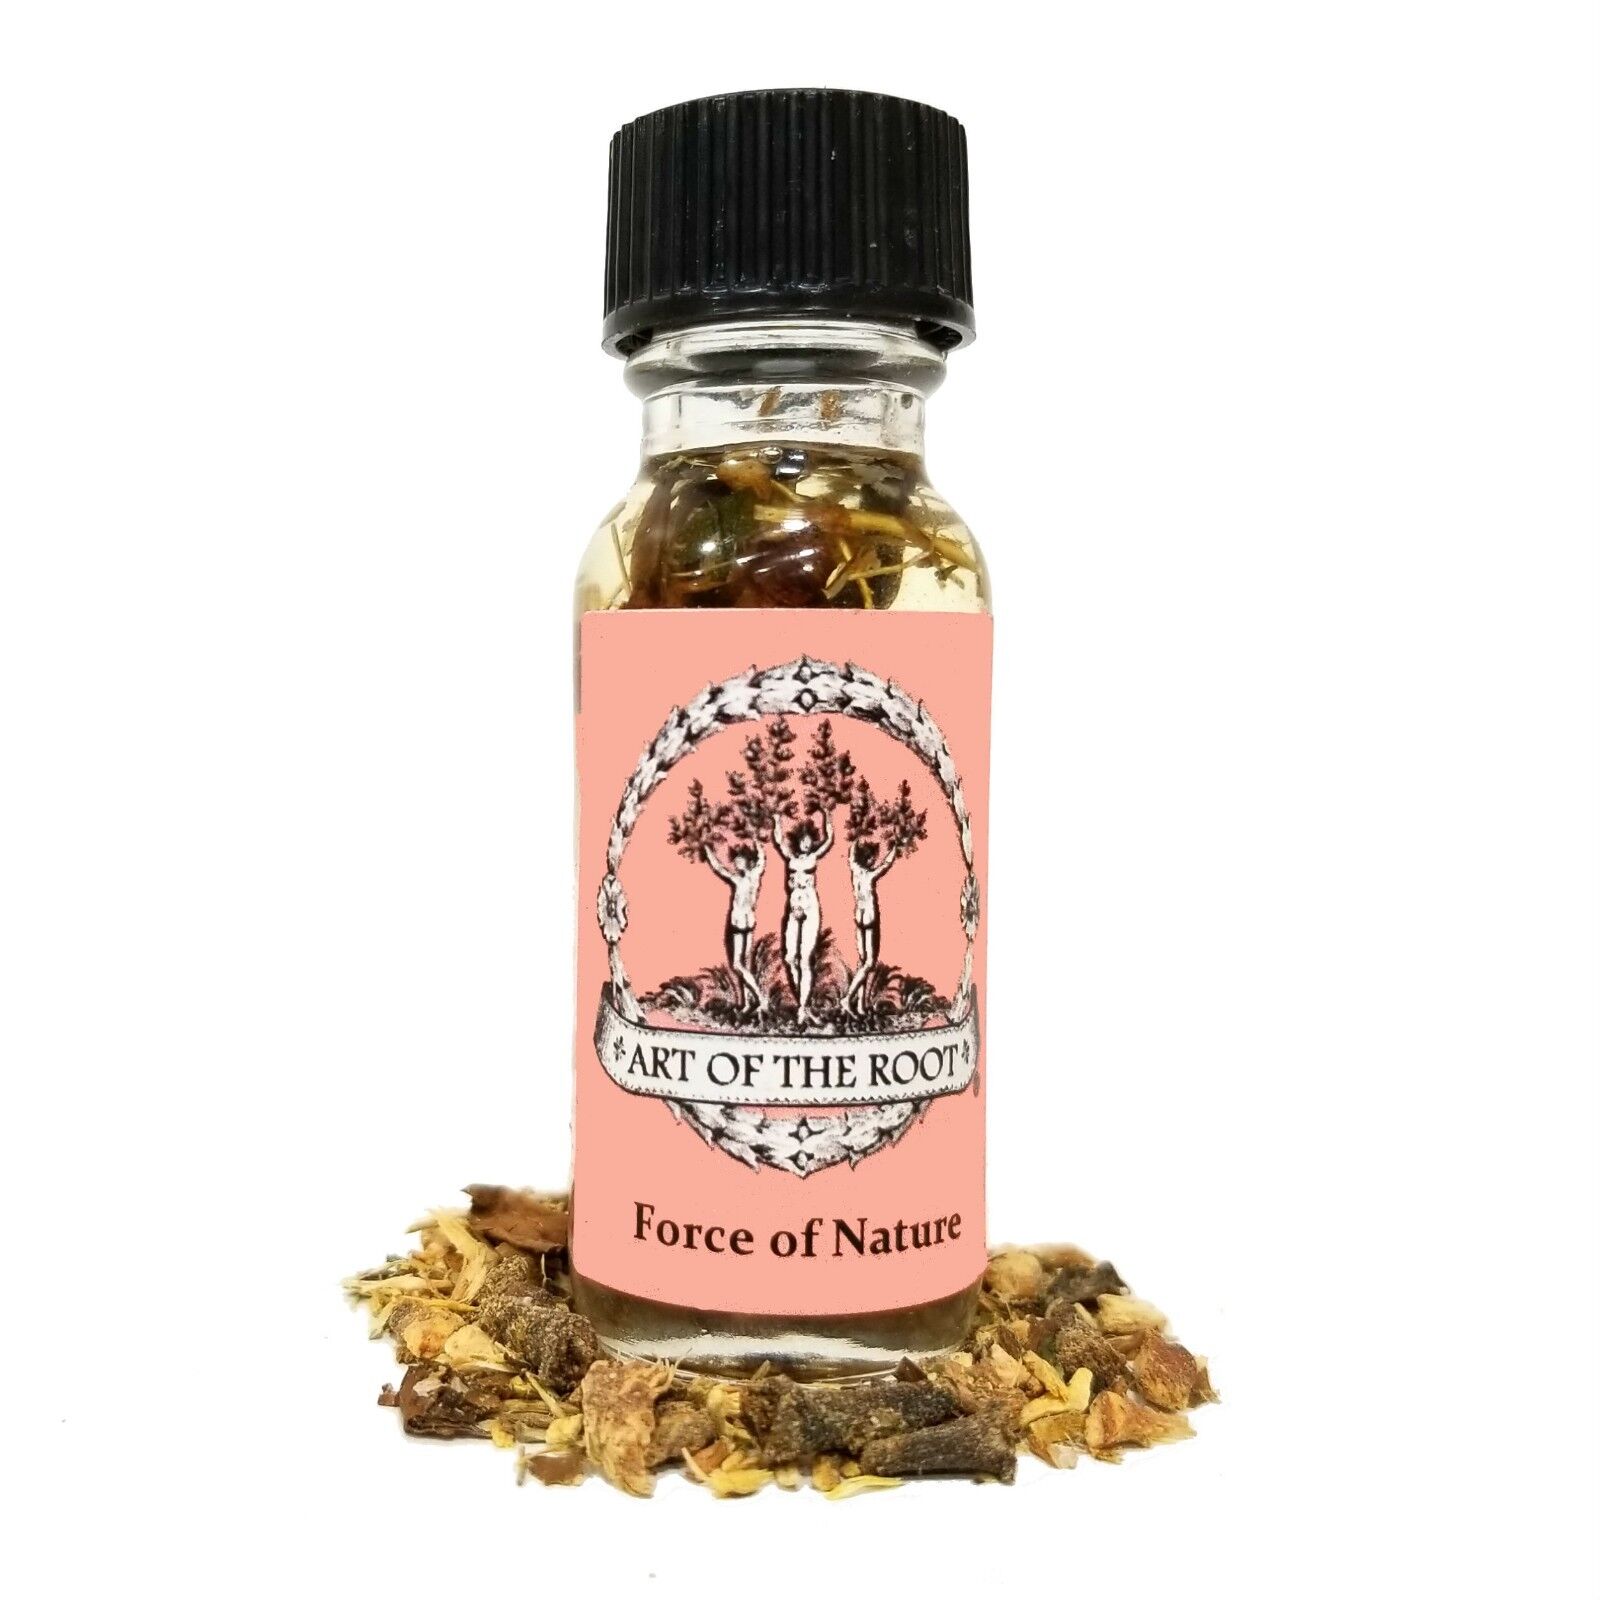 Force of Nature Oil Power Success Influence Victory Hoodoo Wiccan Pagan Conjure